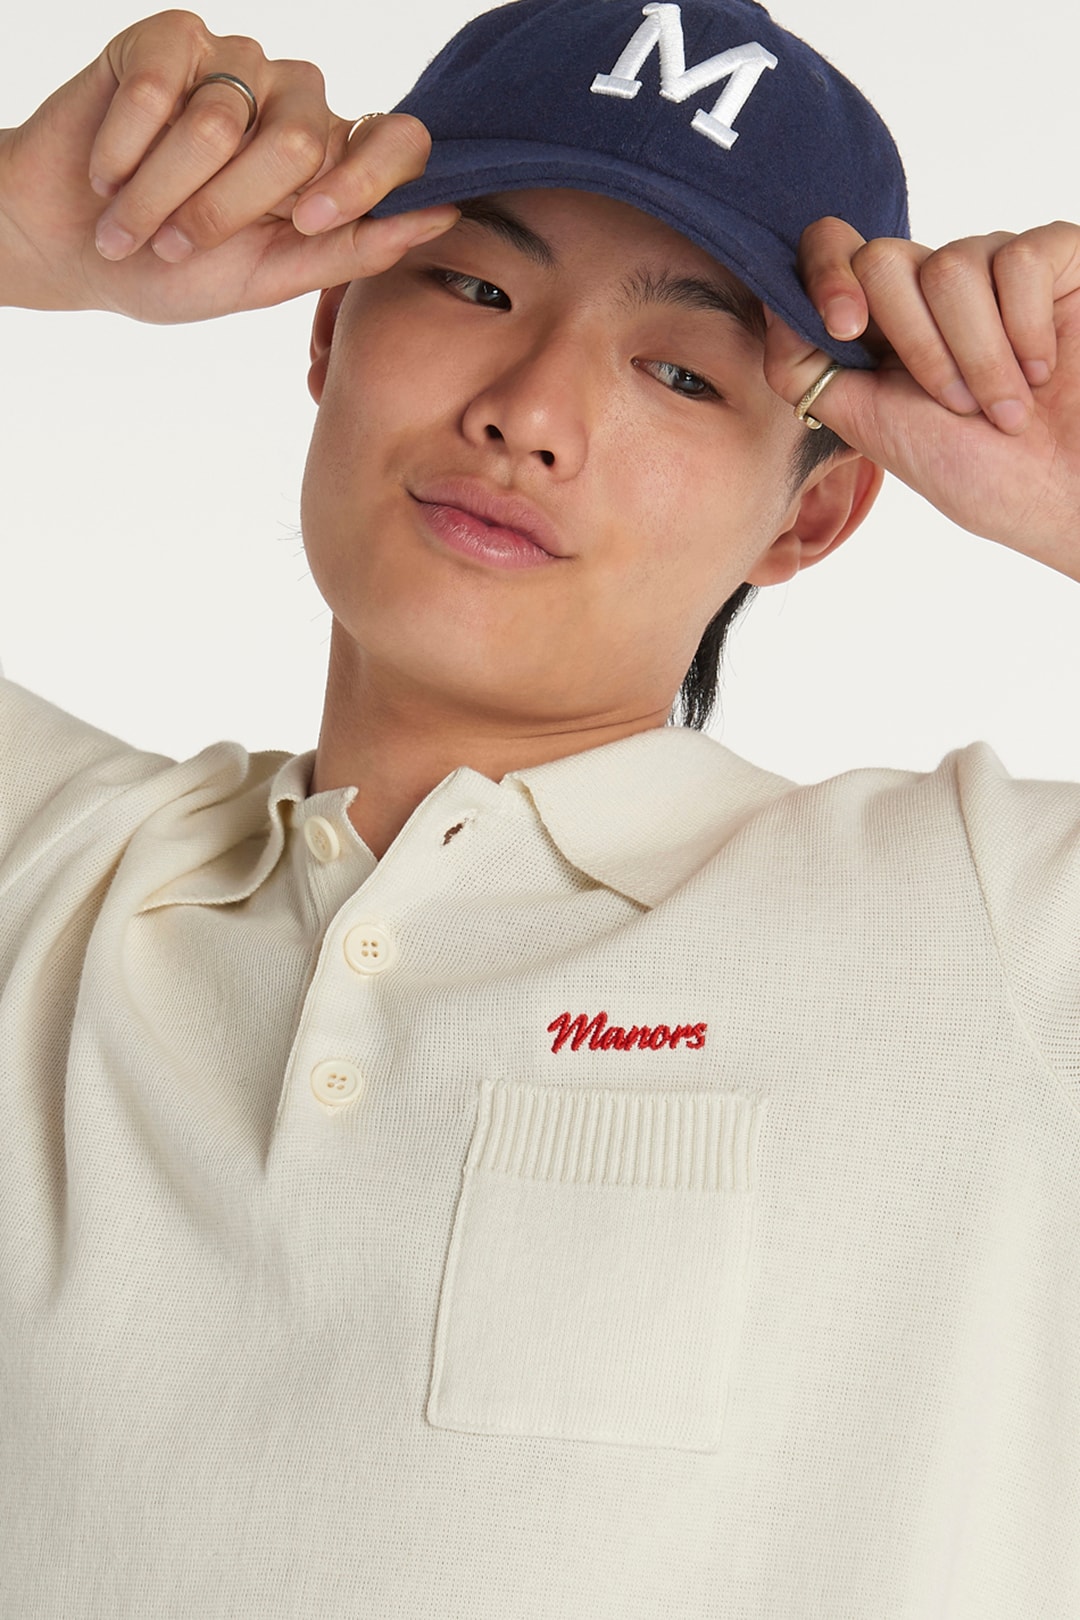 Manors Golf Collection Knitted Polos Wool Caps